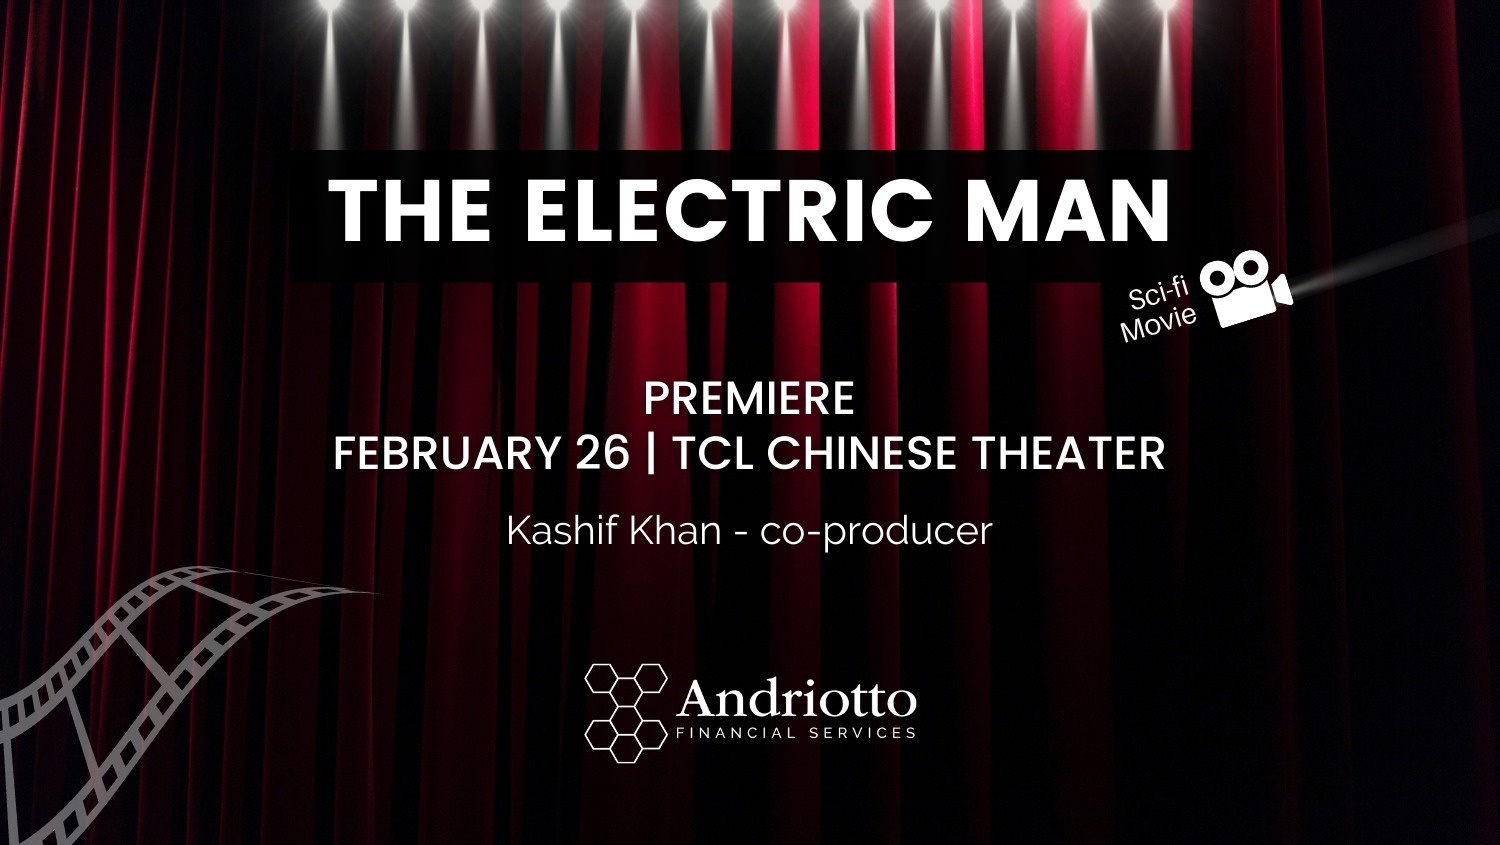 background mocking theatre curtains with the text "the electric man premiere: February 26, TCL Chinese Theatre"